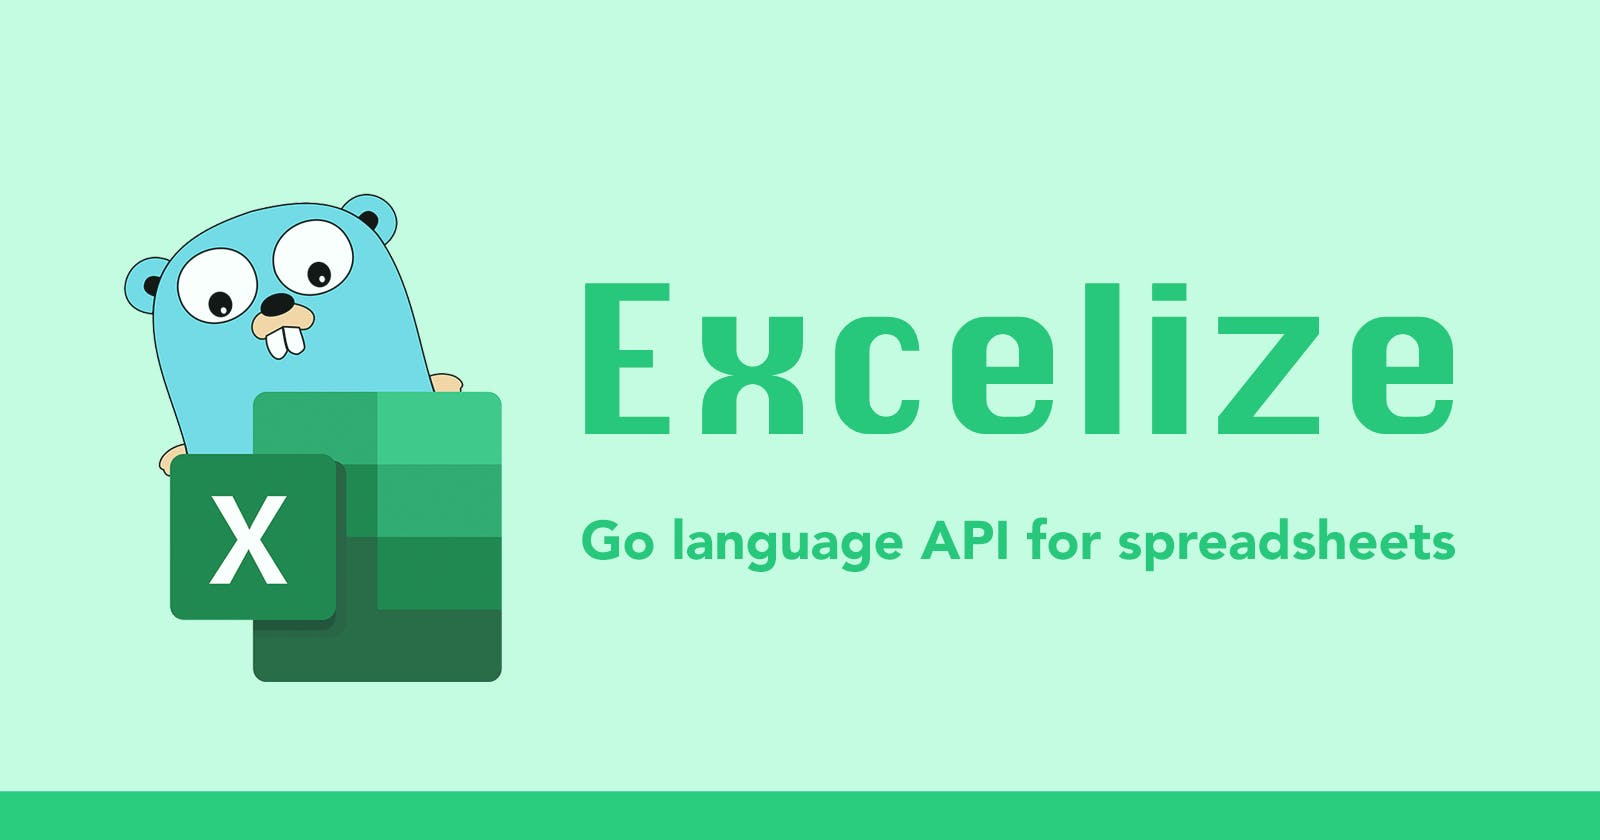 Excelize 2.7.0 Released – Go language API for spreadsheet (Excel) documents